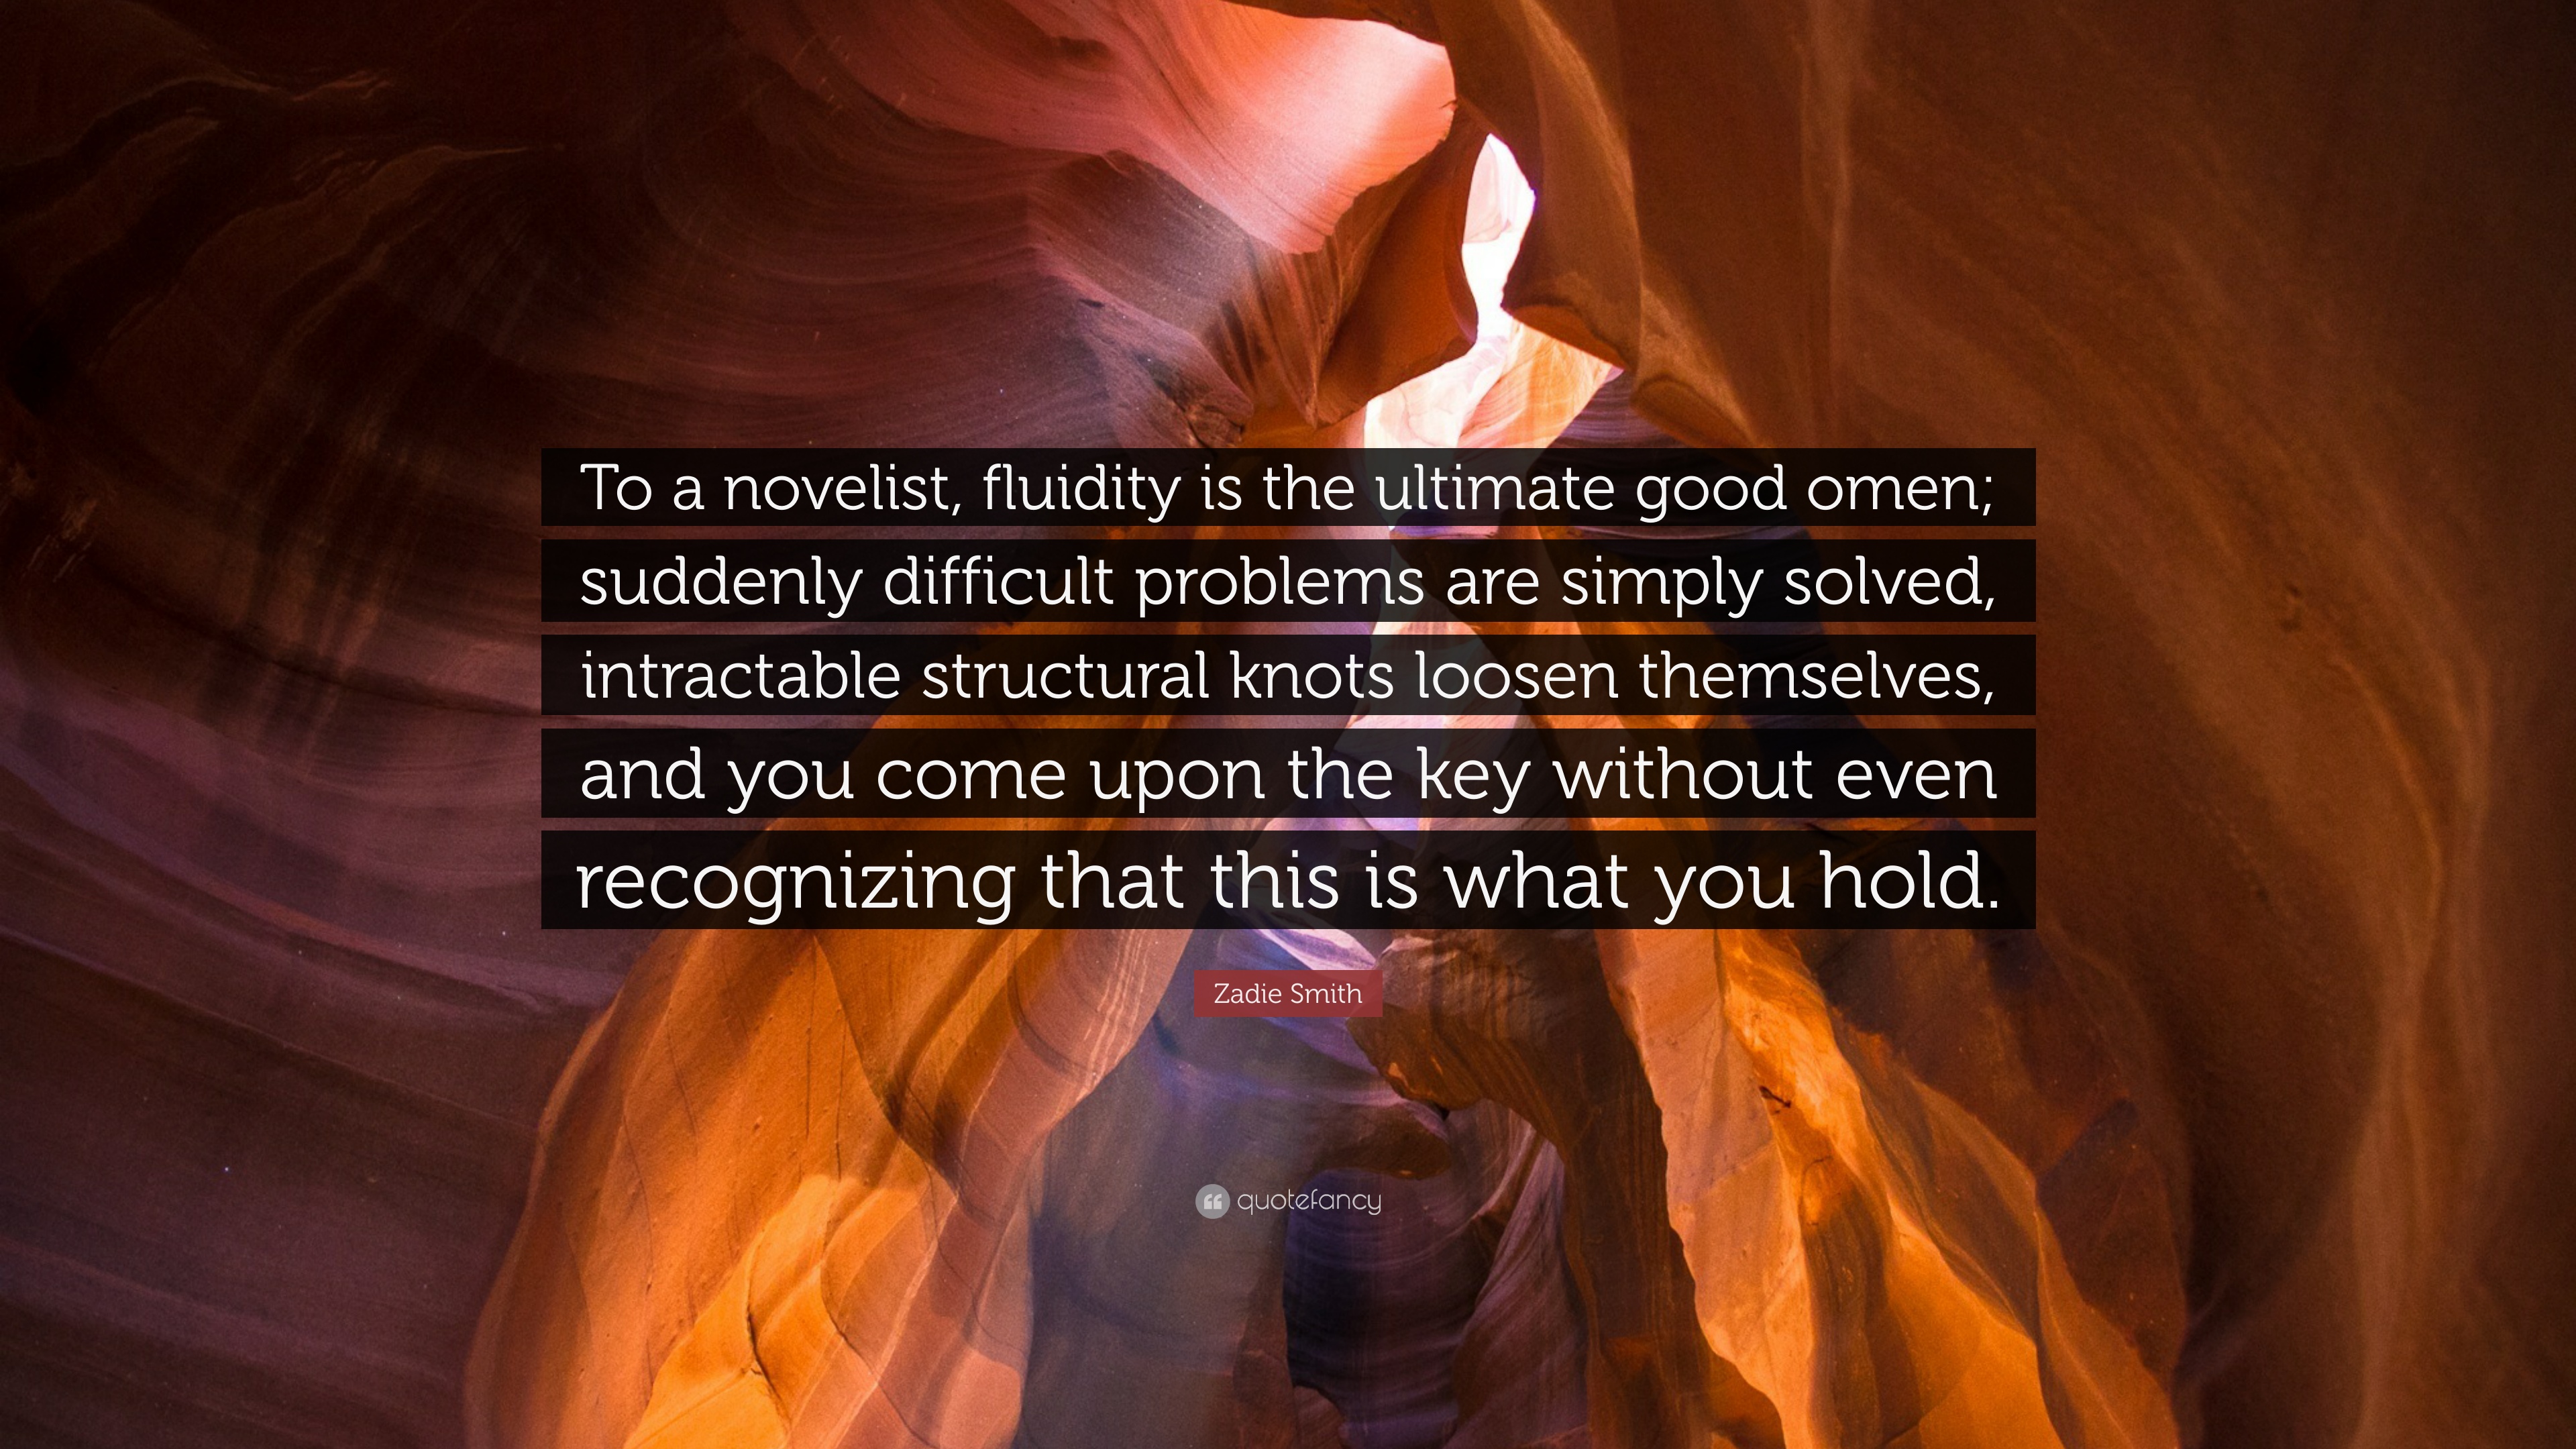 Zadie Smith Quote: “To a novelist, fluidity is the ultimate good